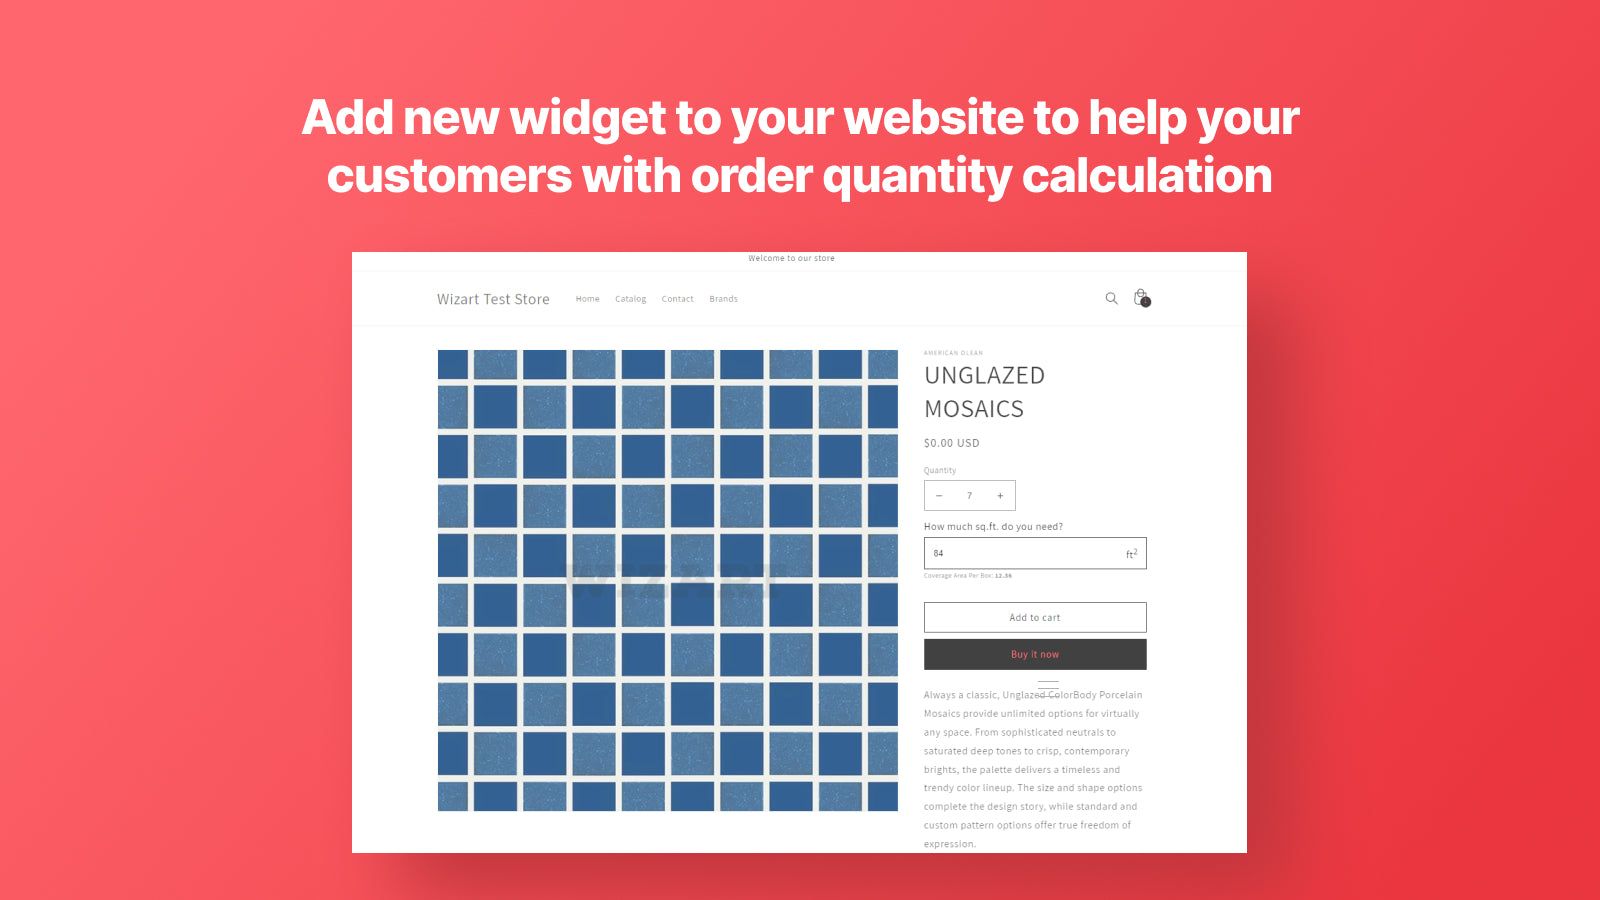 Help your customers to calculate order quantity